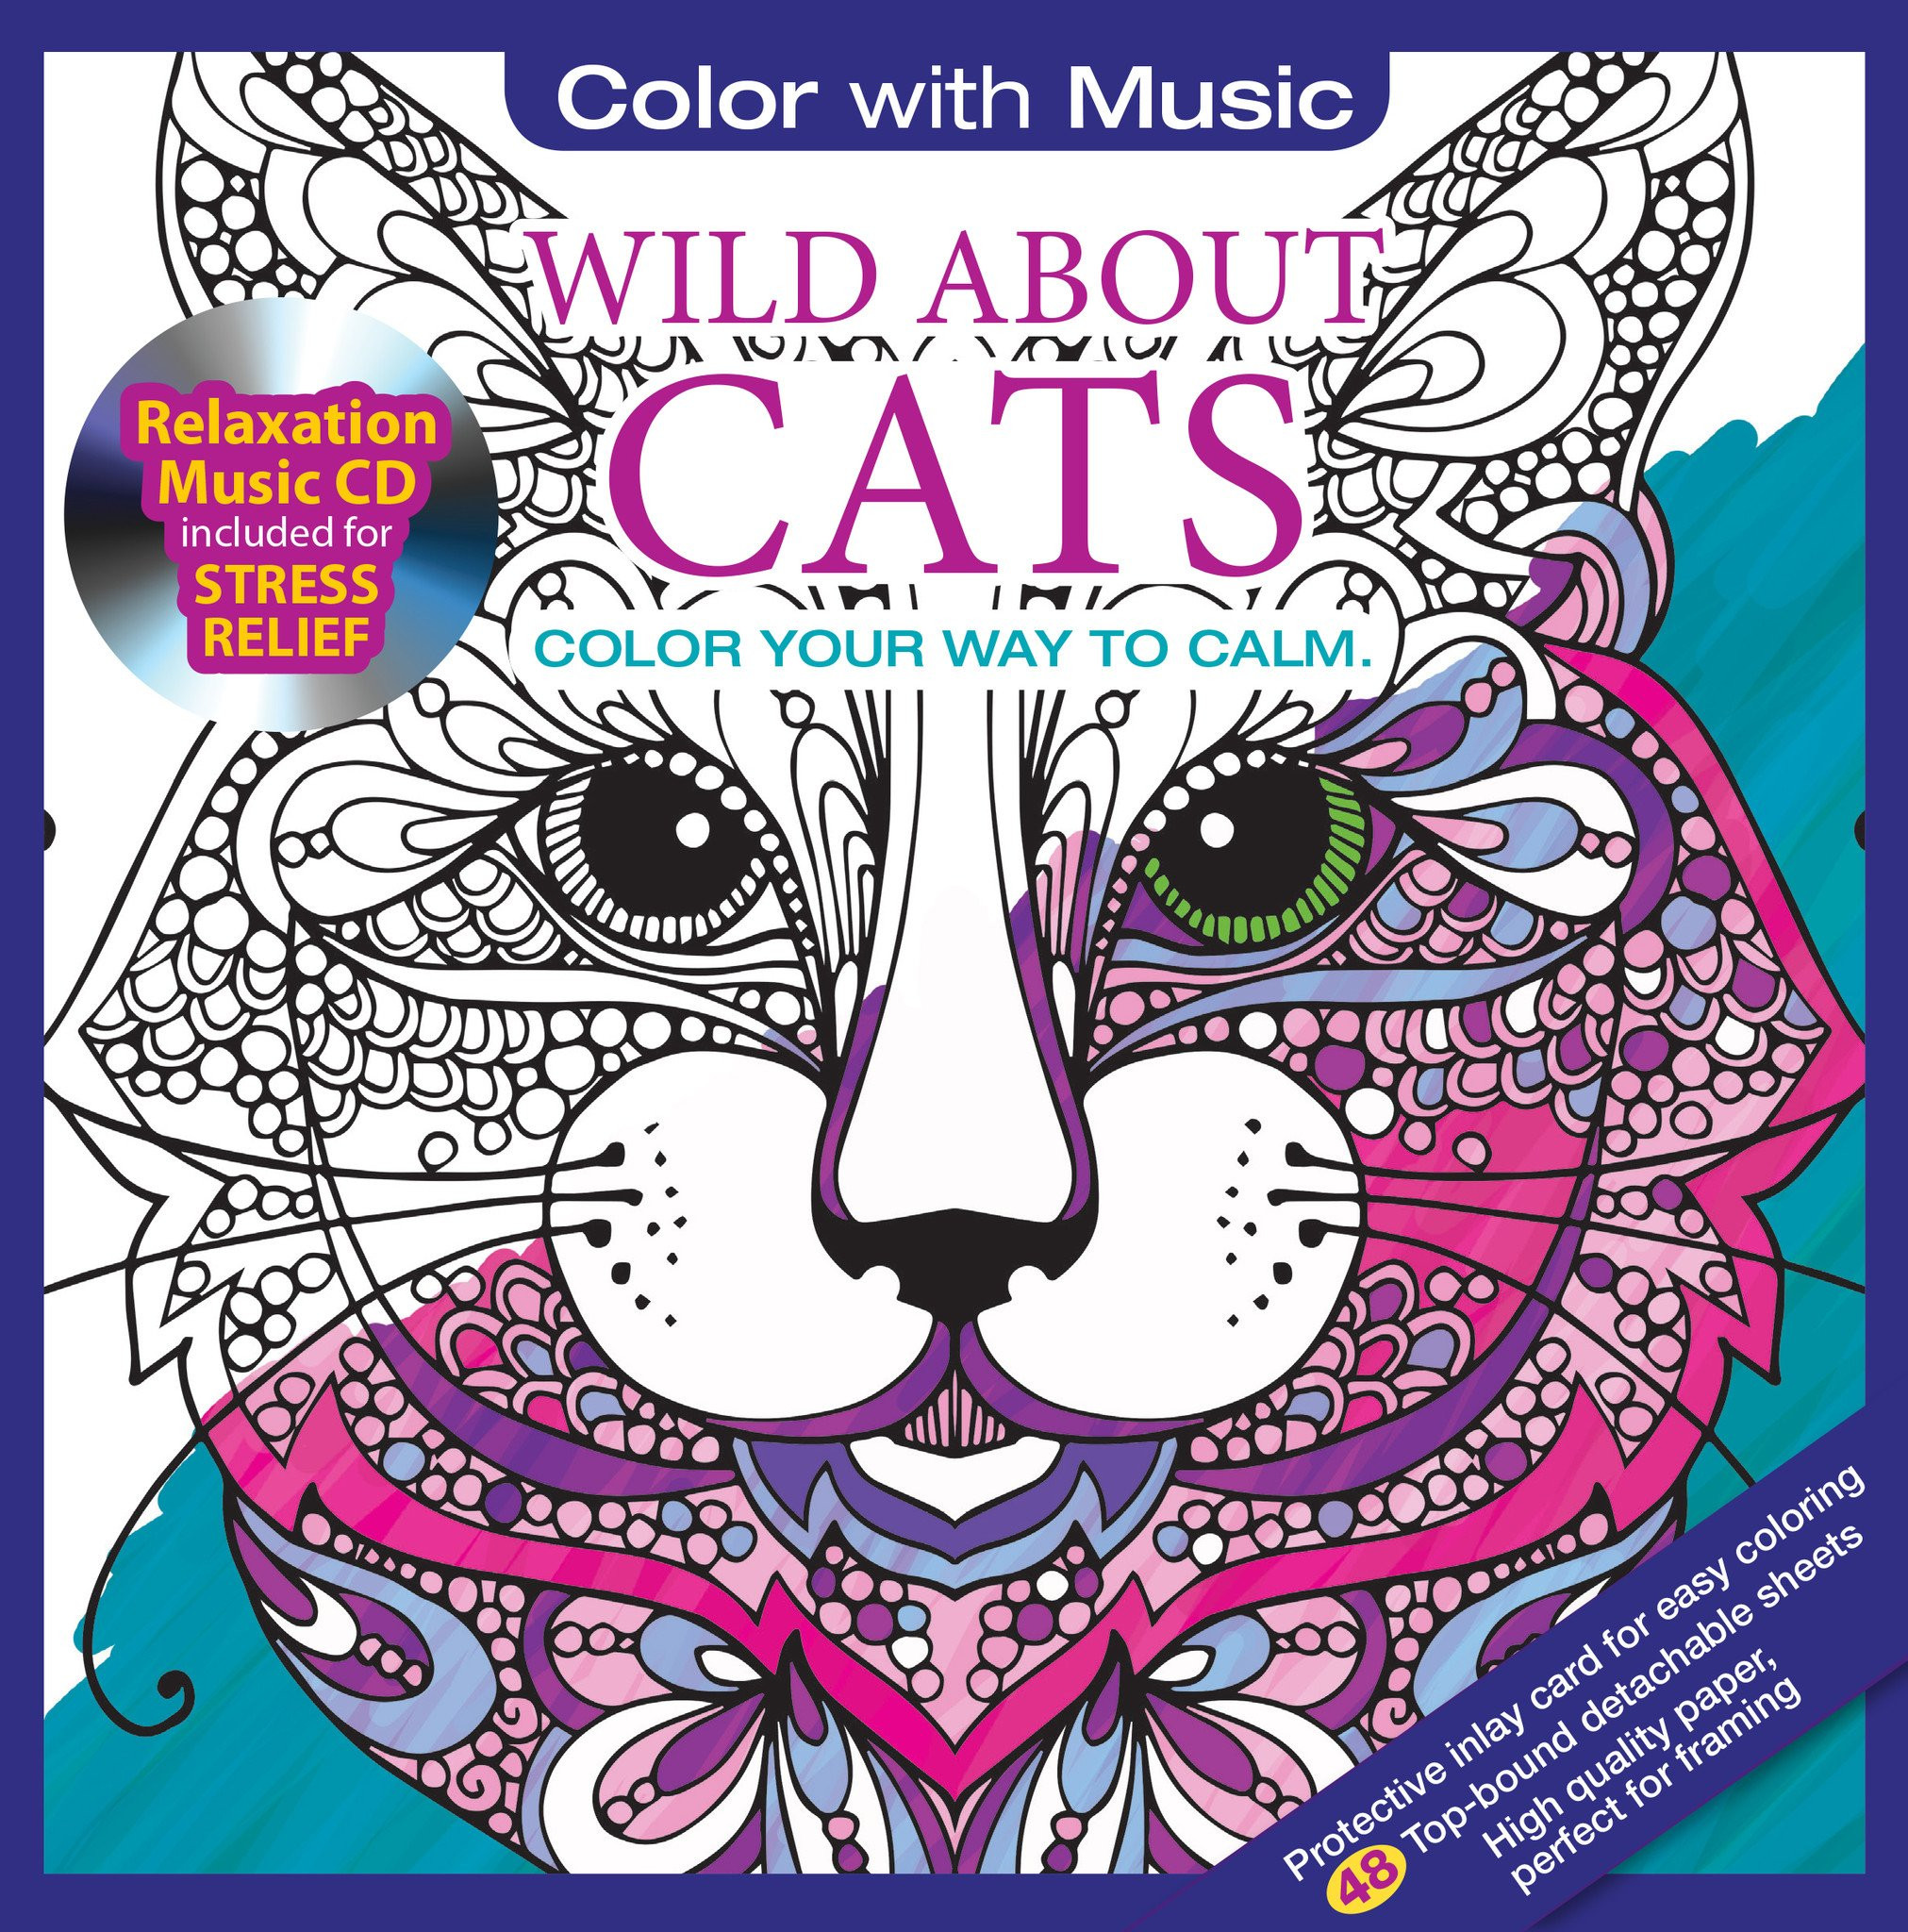 Coloring Book Album Cover
 Wild About Cats Adult Coloring Book With Relaxation CD